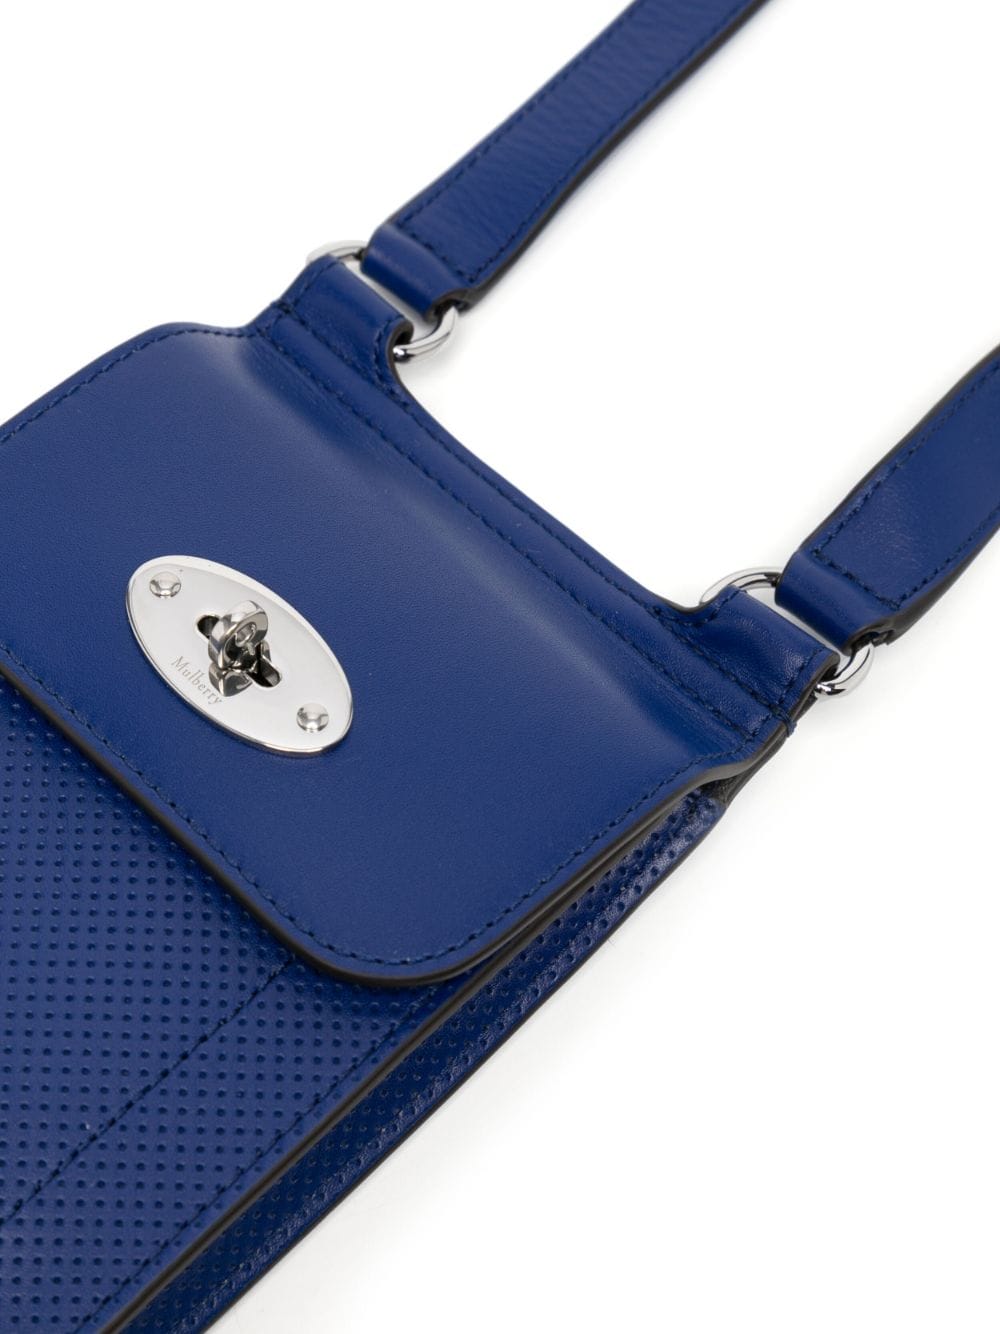 Shop Mulberry Antony Messenger & Shoulder Bags by SMSTYLE